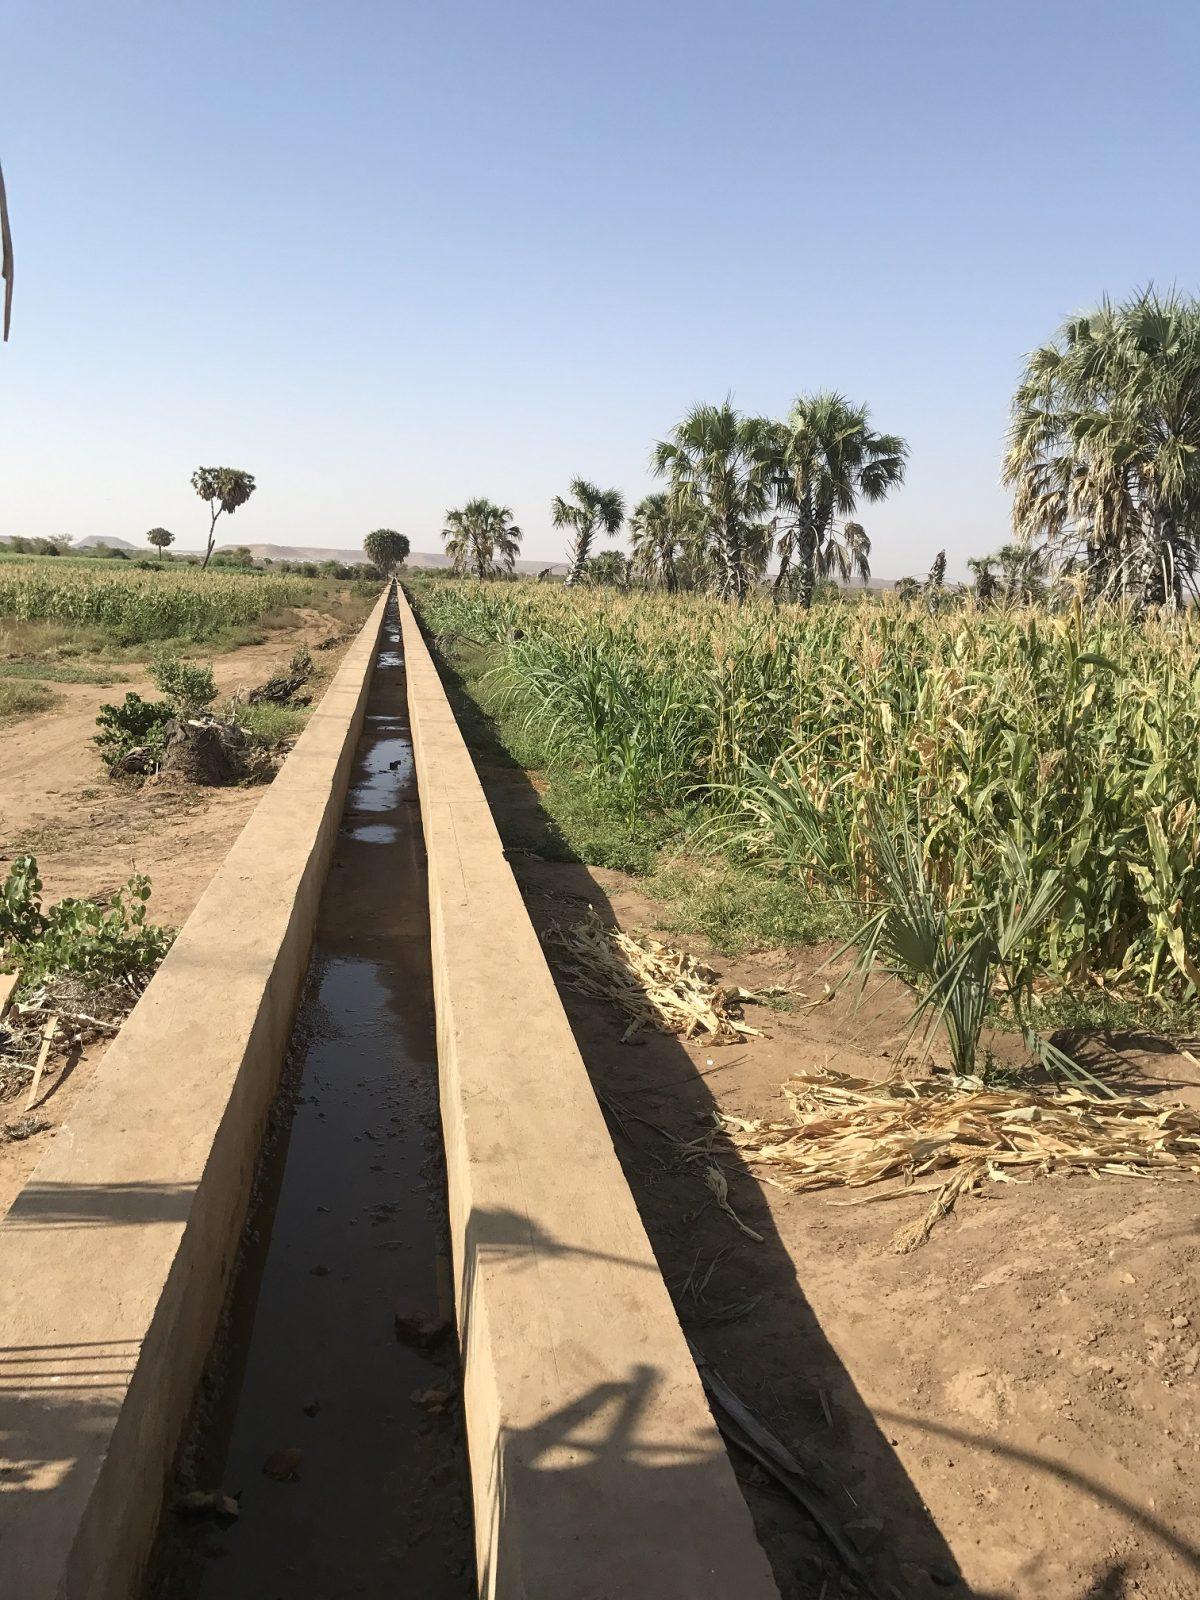 Miles of canals cross 80 hectares of land split up equally between host communities and refugees in Melkadida, Ethiopia. (Lisa Sim/Epoch Times)